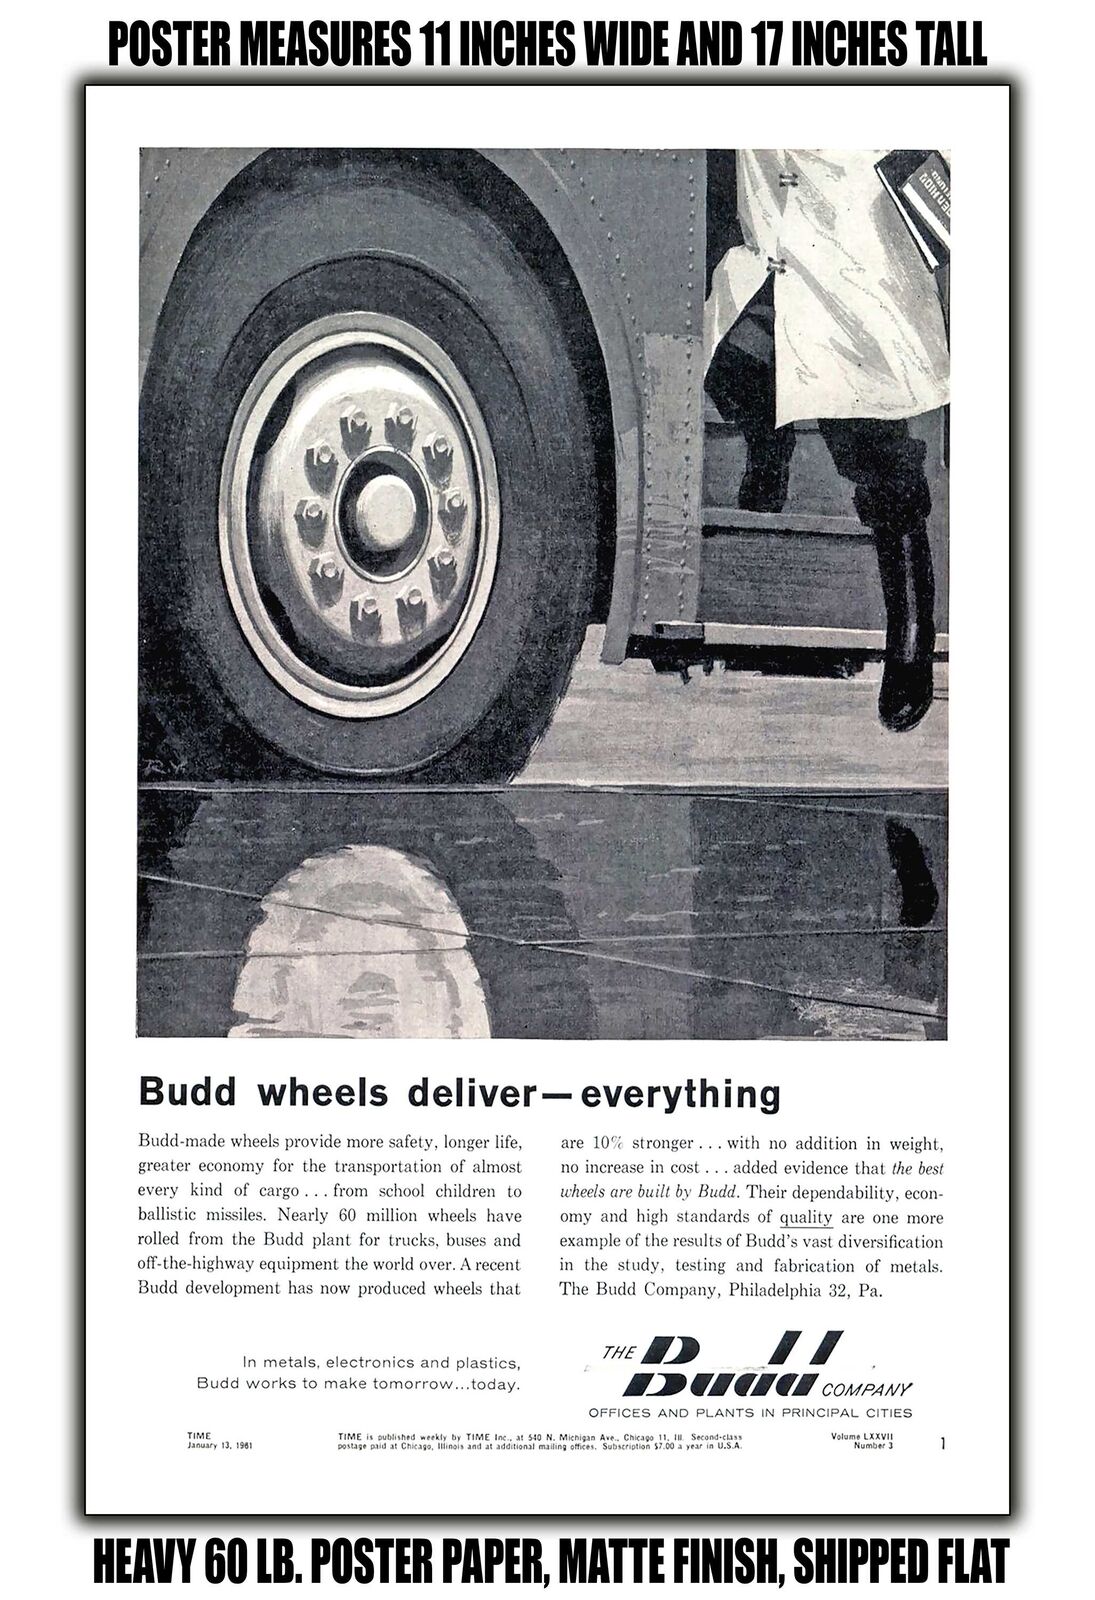 11x17 POSTER - 1961 Budd Wheels Deliver Everything